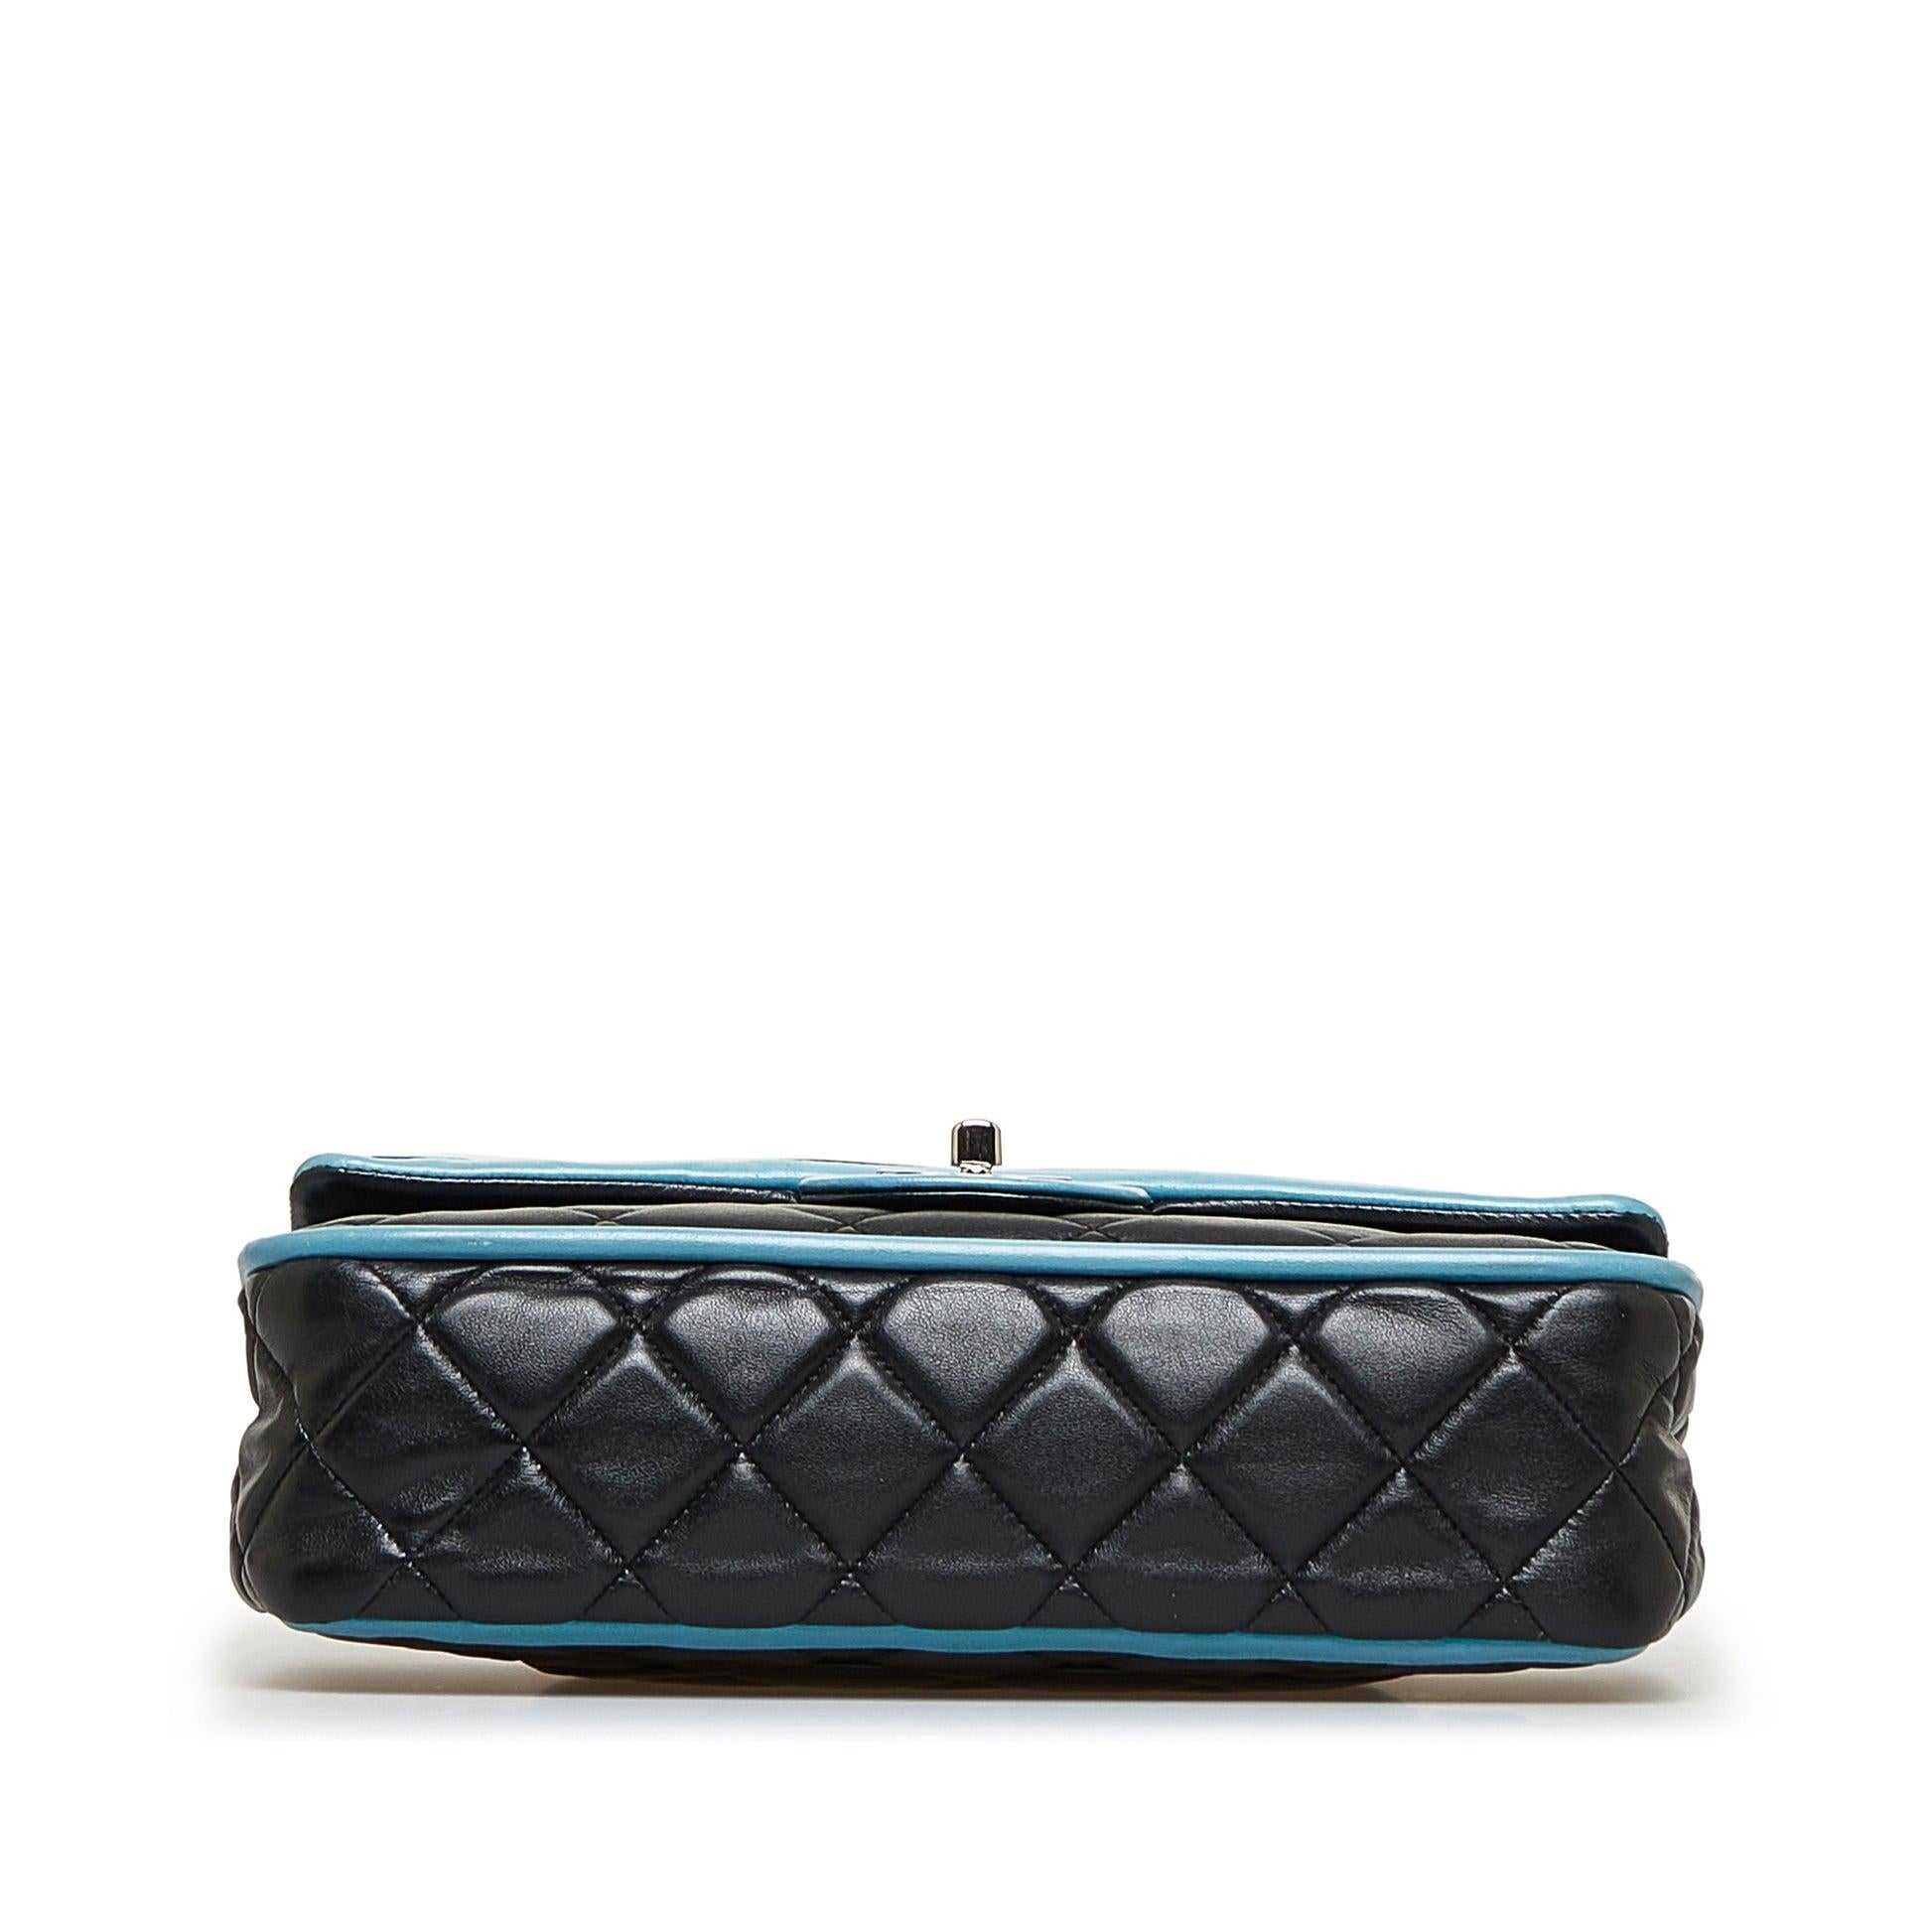 Chanel 2006 Medium Double Classic Flap in Black Lambskin Turquoise Piping Bag 8